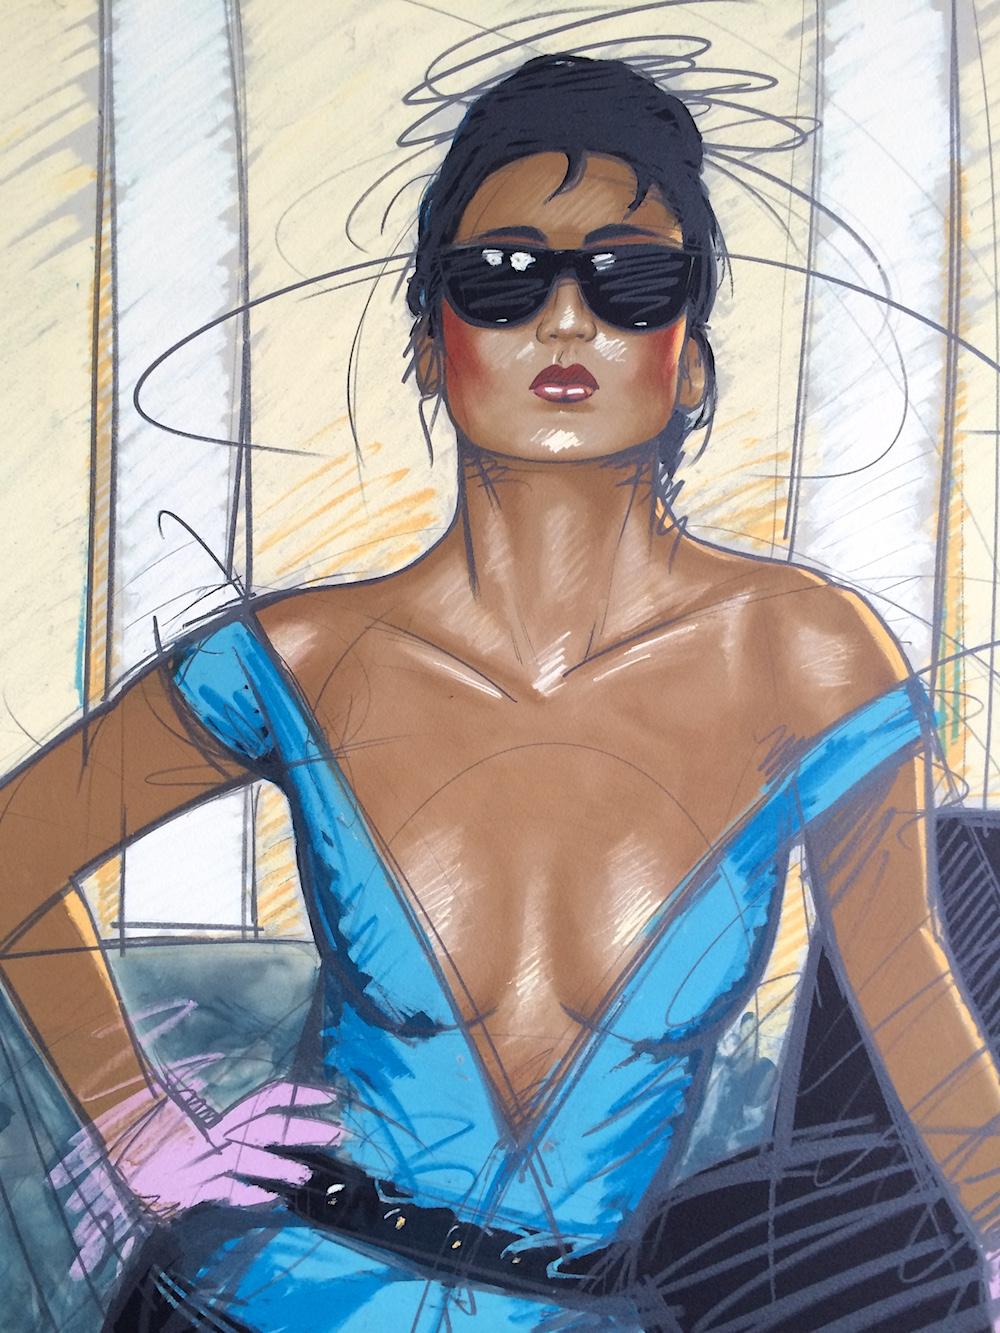 JEANE Signed Lithograph, Fashion Portrait, Exotic Woman, Dark Sunglasses, Gloves - Print by Nico Vrielink